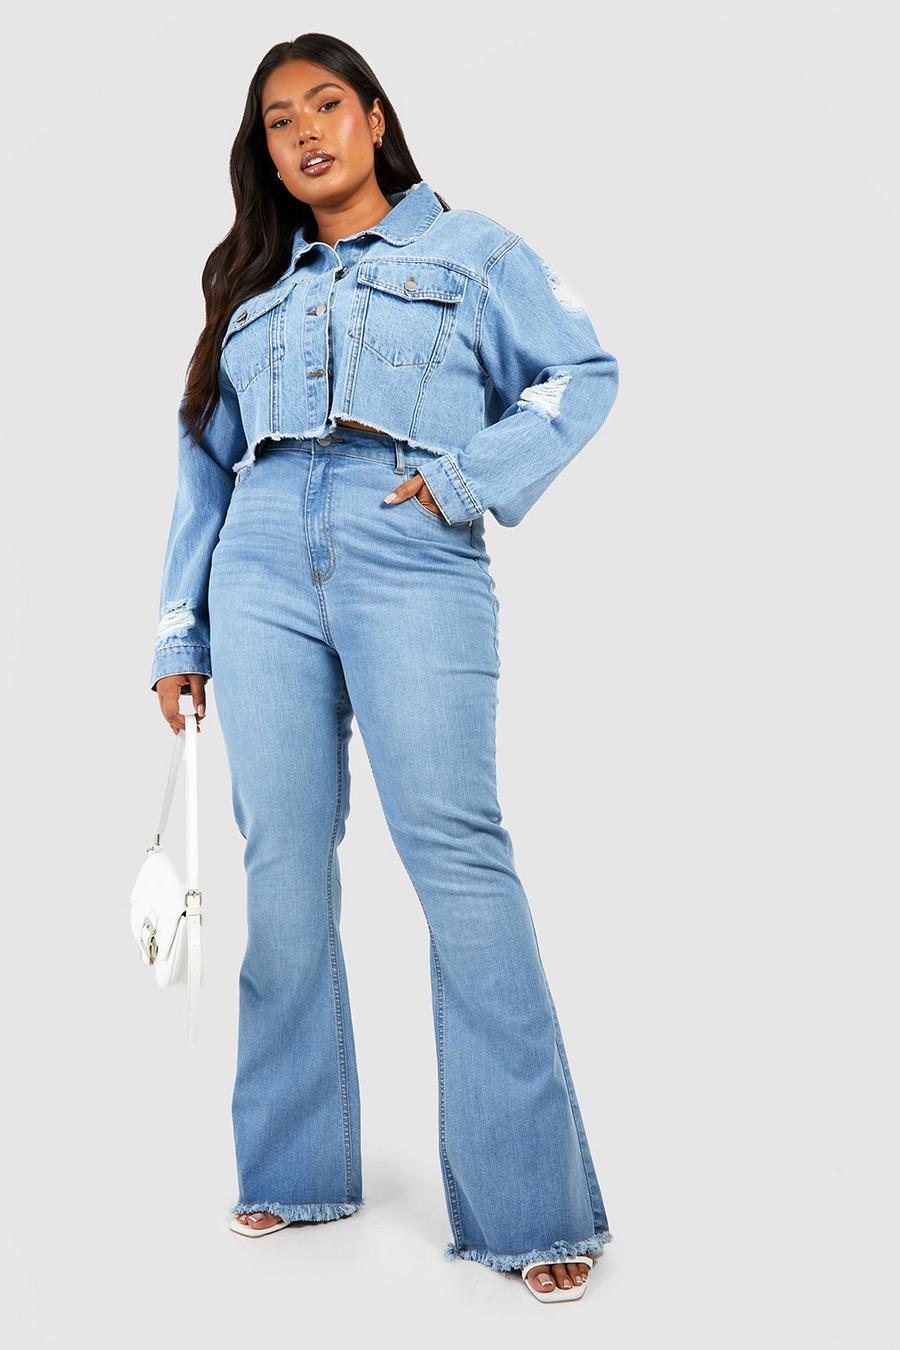 Flare Jeans Women Denim Pants High Waisted Slit Leg Vintage Streetwear Bell  Bottom Fashion Clothes Cut Out Full Length Traf